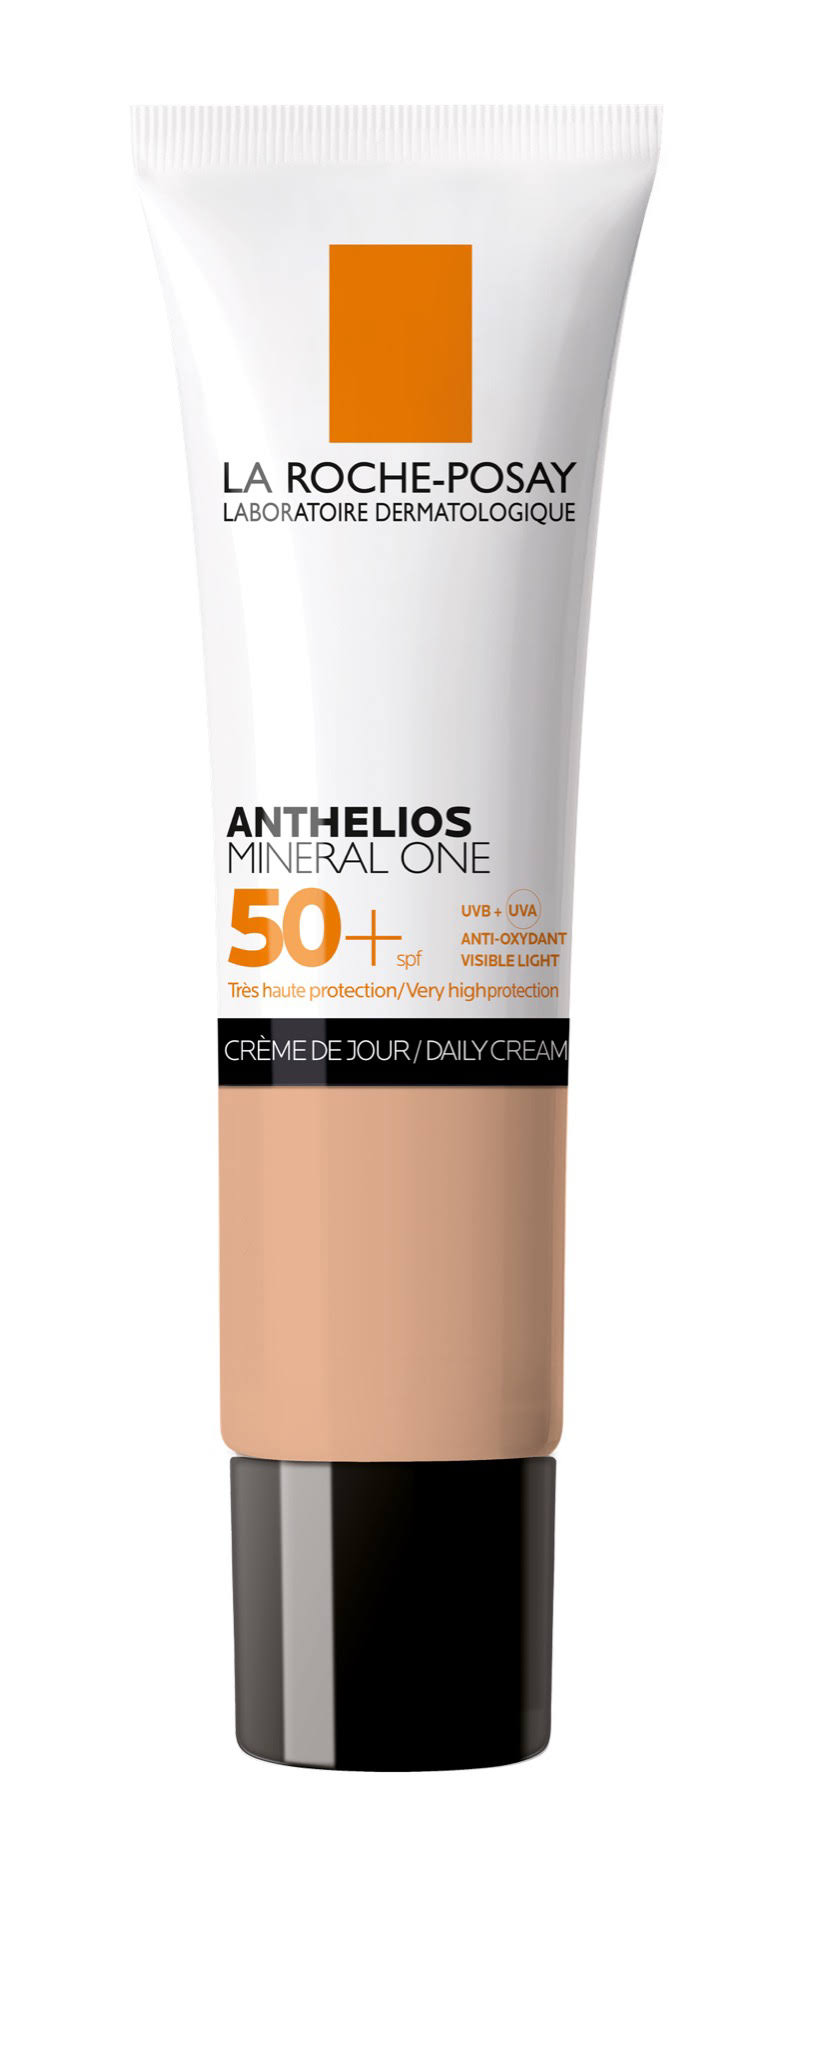 La roche-posay anthelios mineral one spf 50+ 30 ml